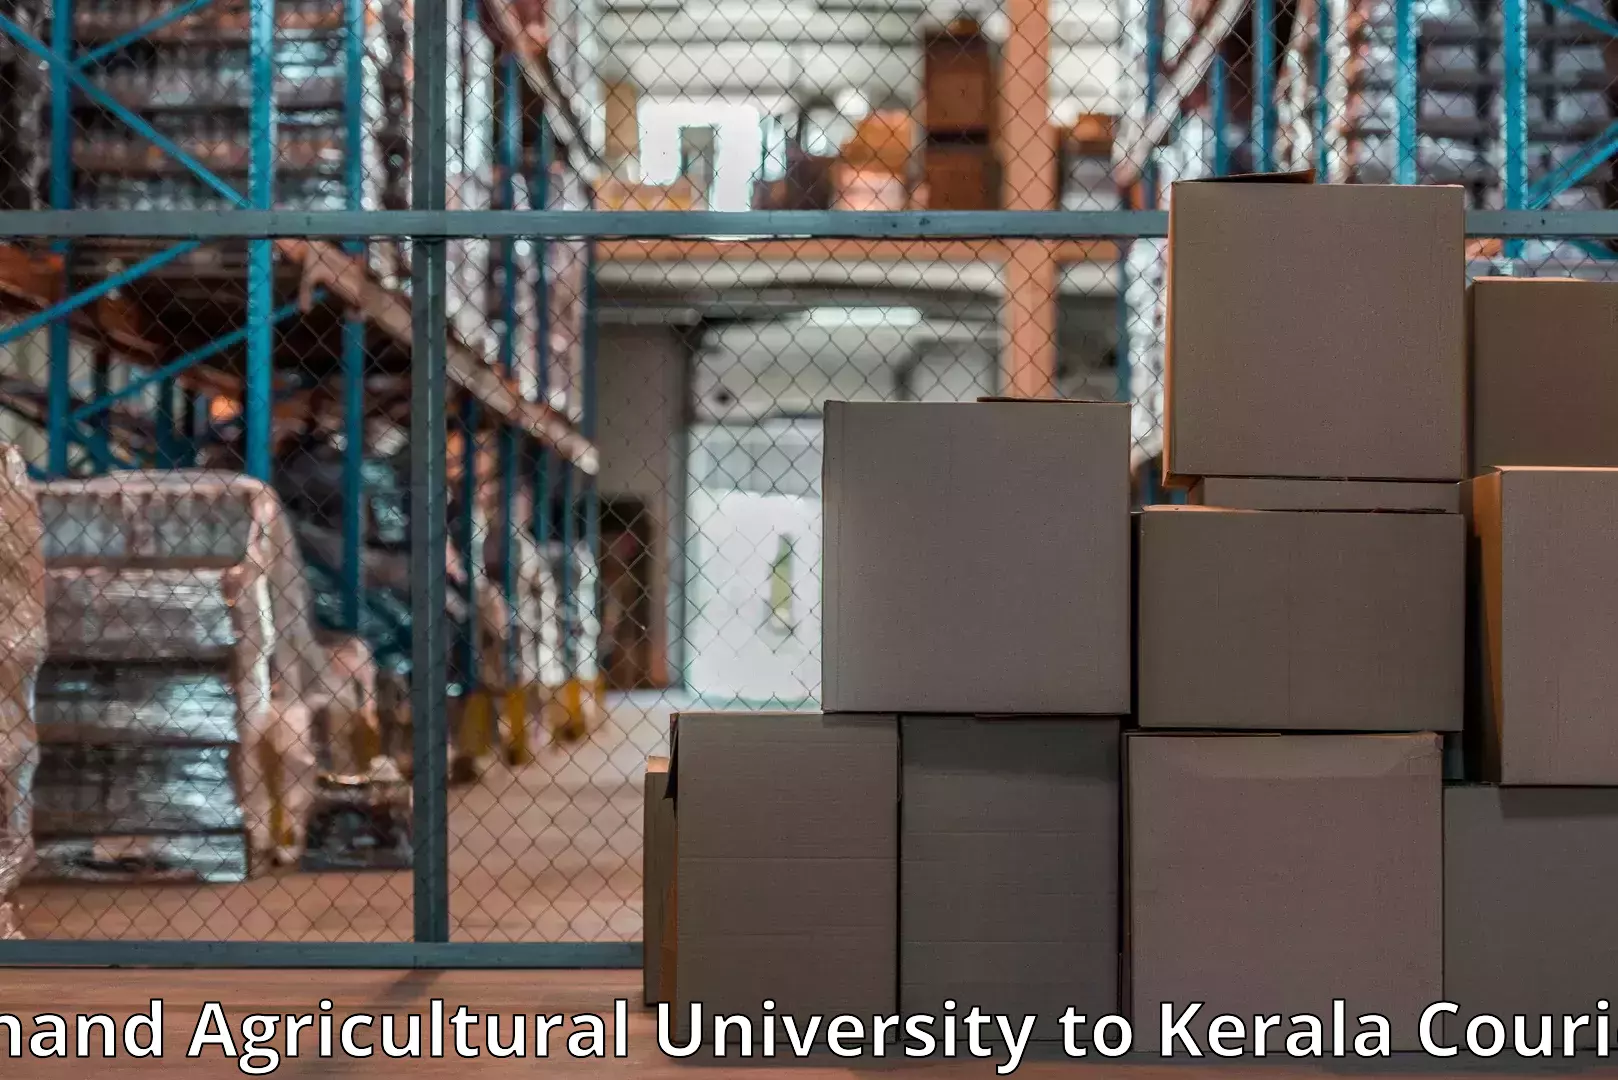 Full-service furniture transport Anand Agricultural University to Kunnamkulam